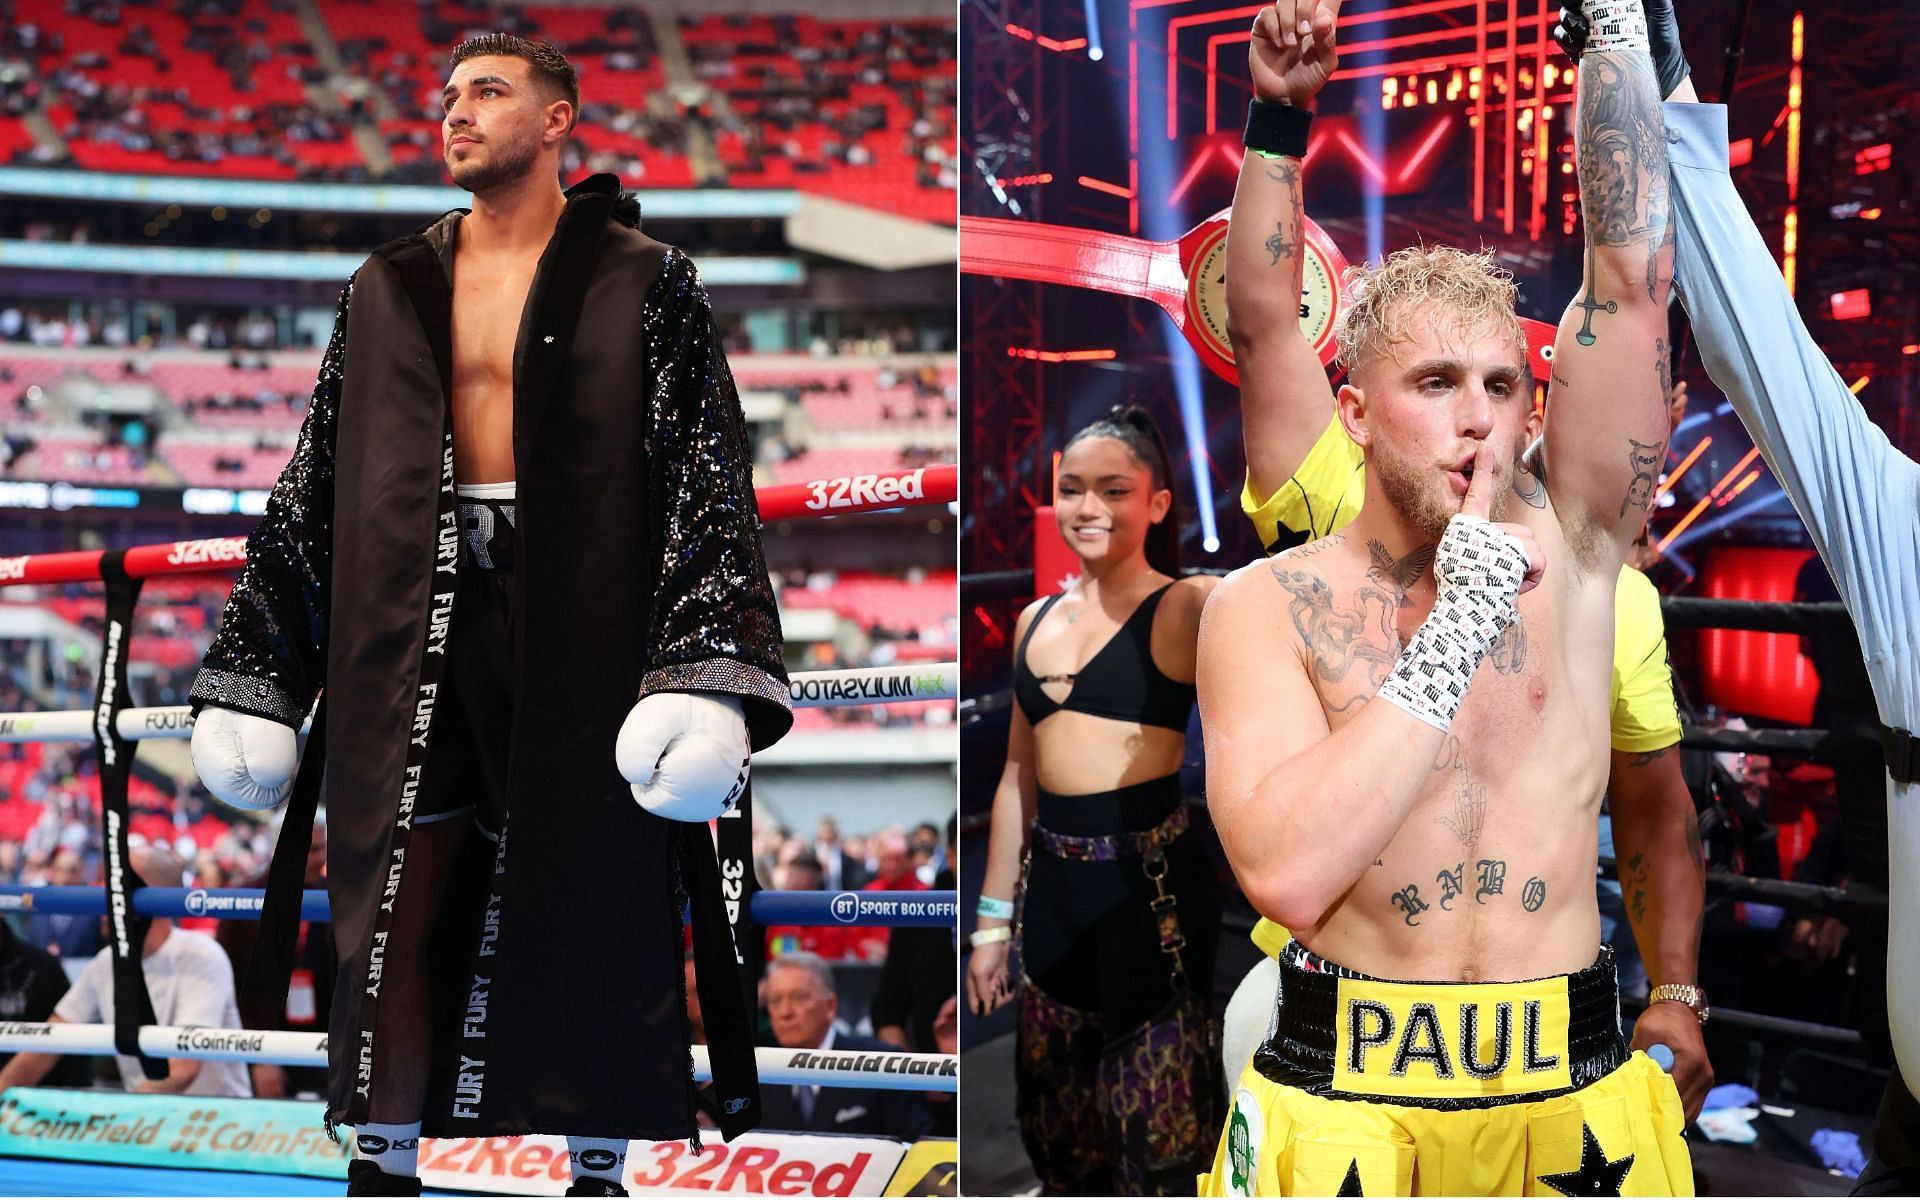 Tommy Fury (L) has begun taking shots at Jake Paul (R) after their fight announcement.